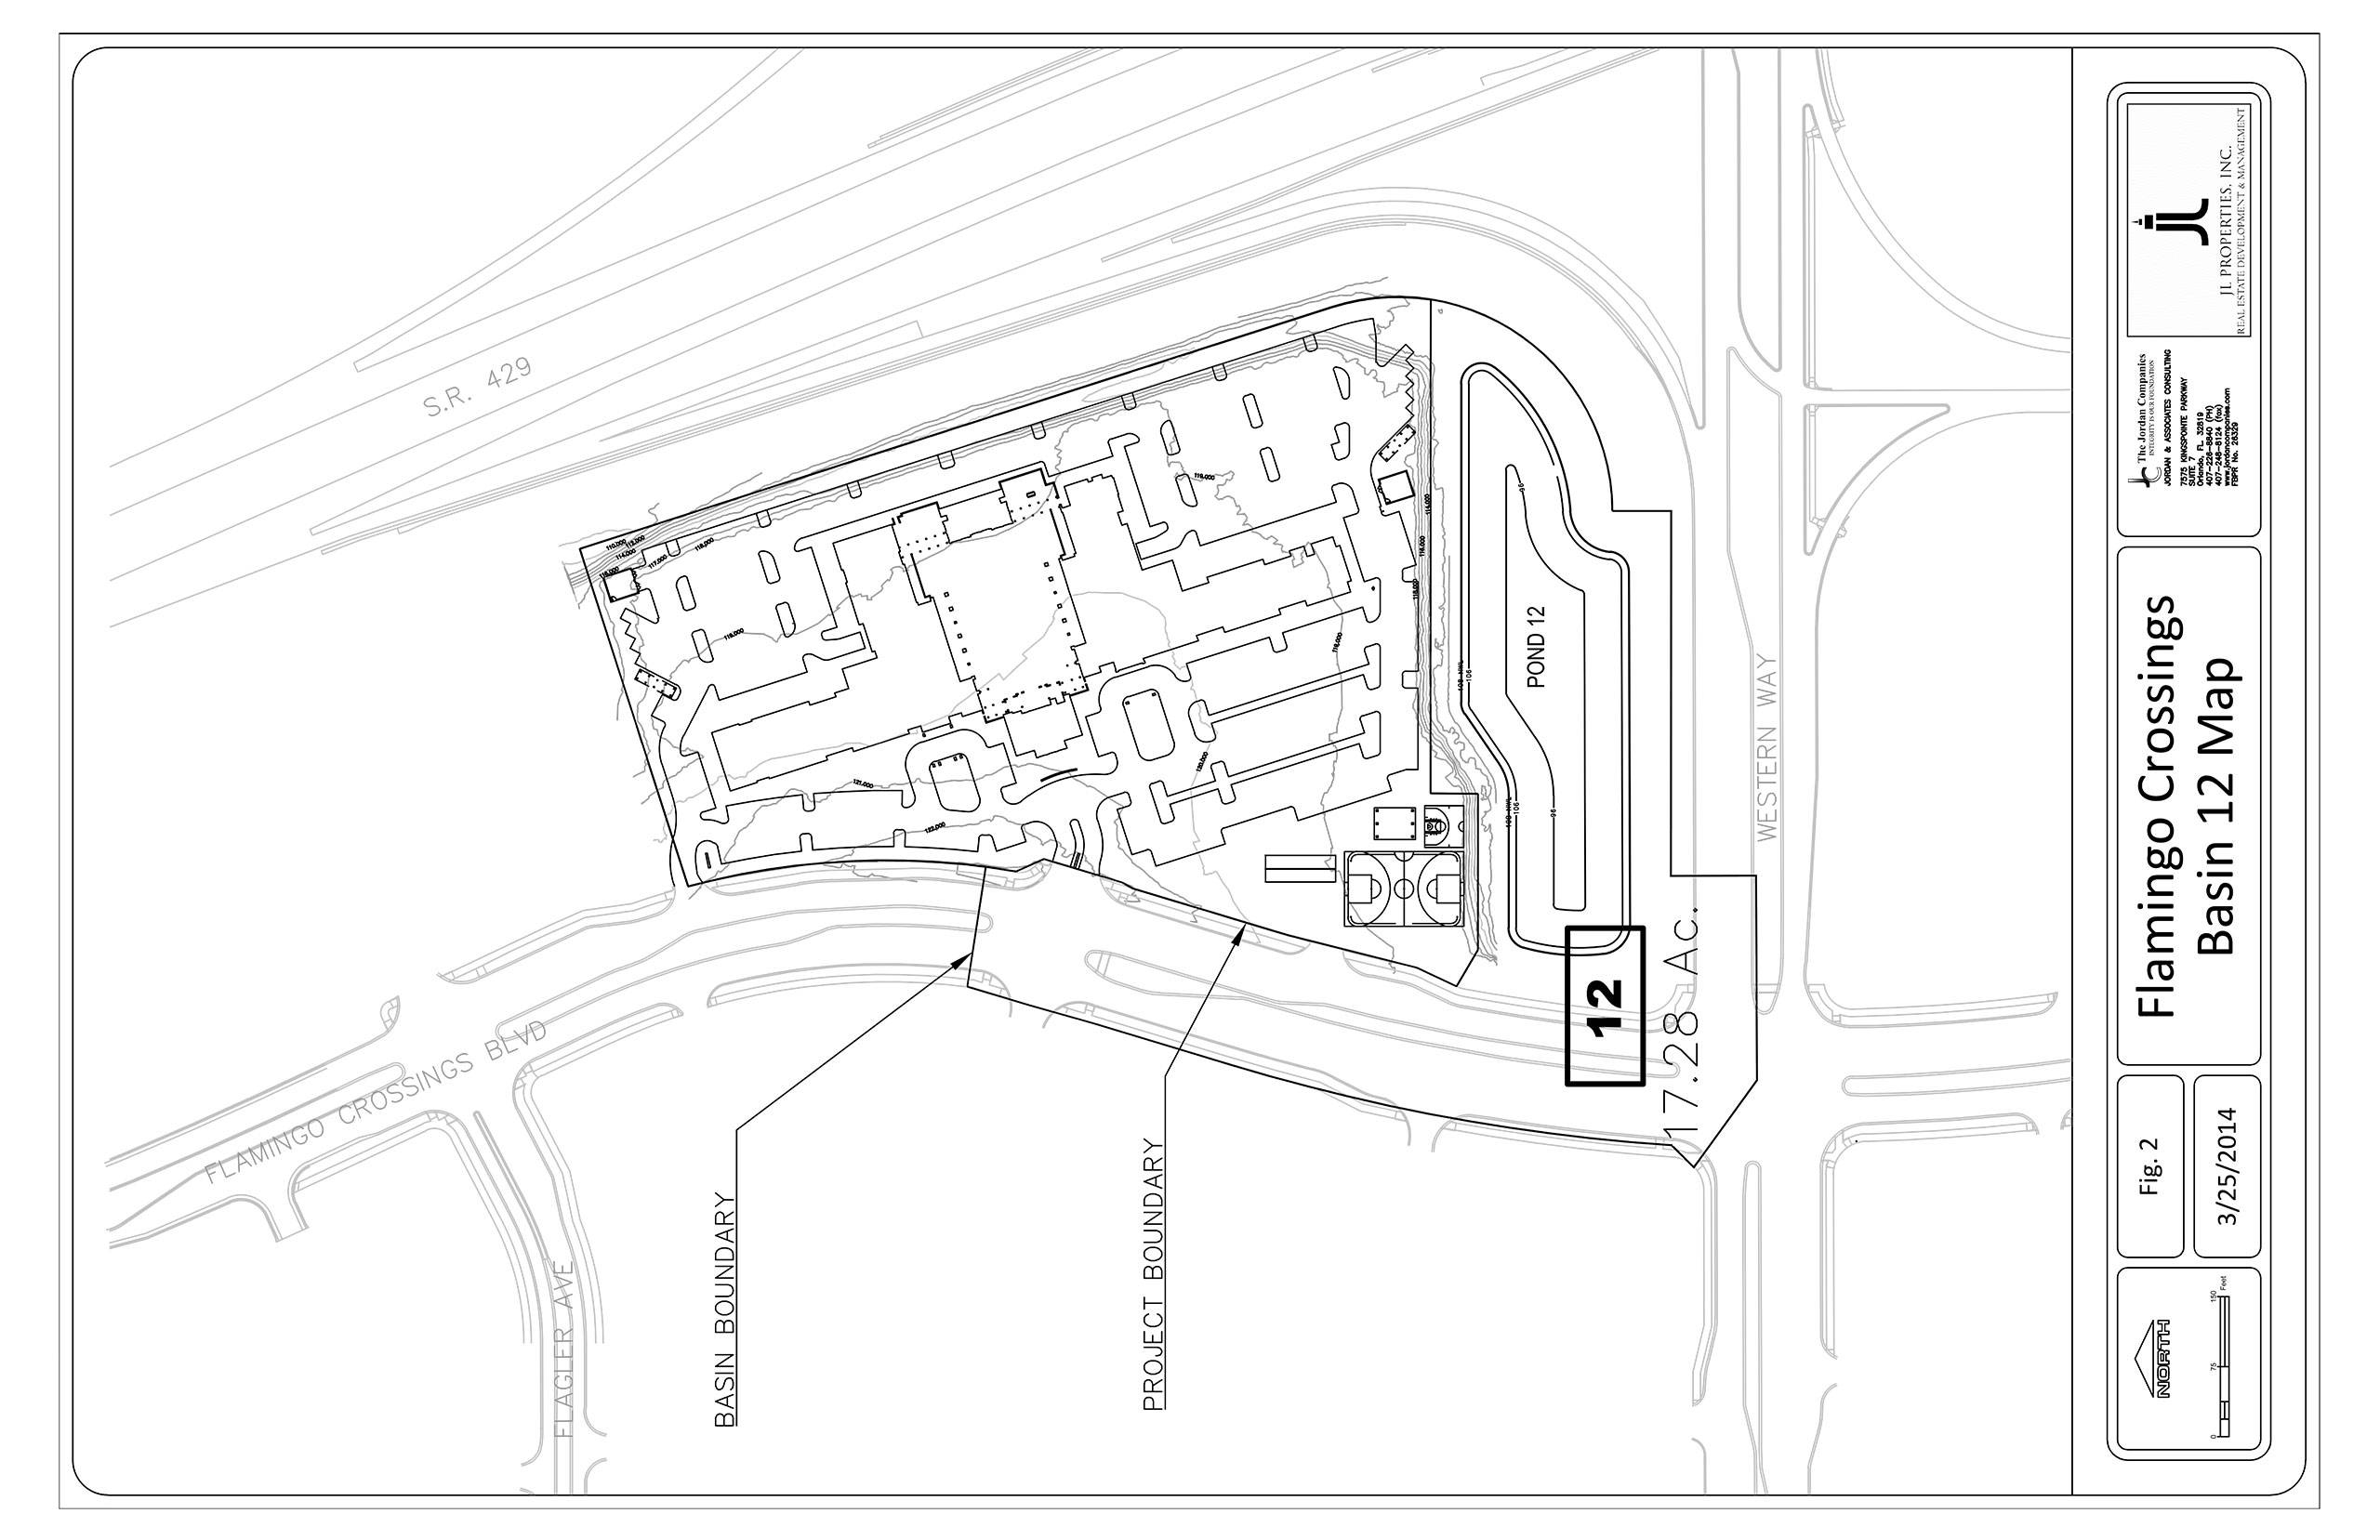 Two Marriott hotels coming to Flamingo Crossings on the Western entrance of Walt Disney World?